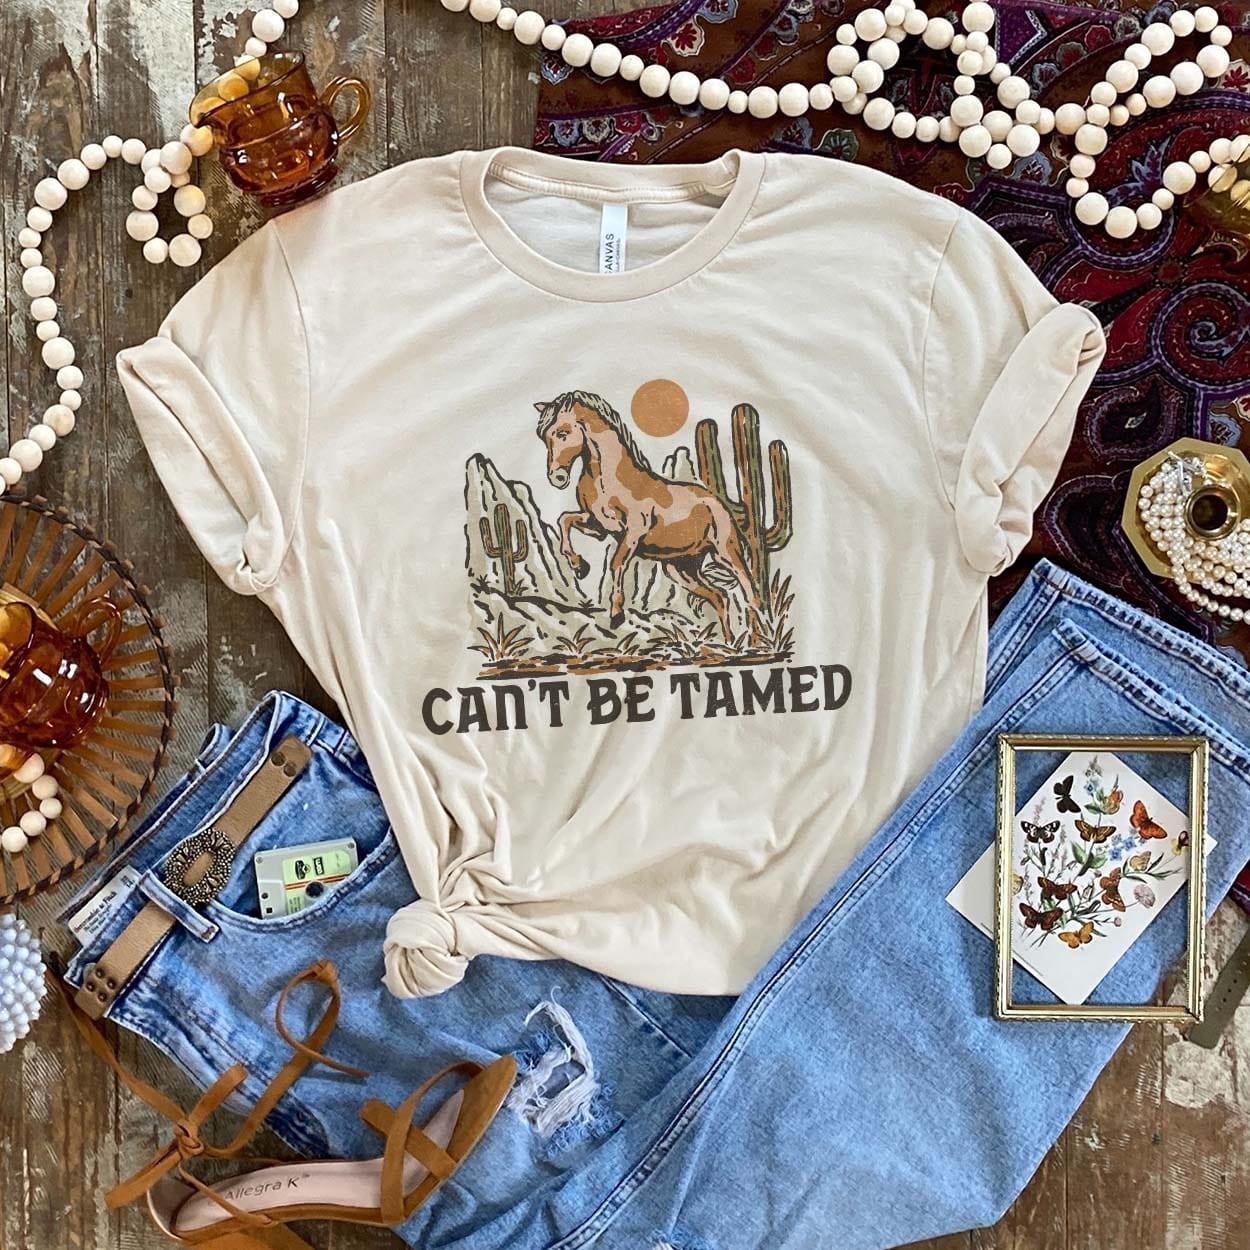 Can't Be Tamed Tee - cow, cowgirls, cows, desert, graphic, horse, shirt, tee, tees, western -  - Baha Ranch Western Wear